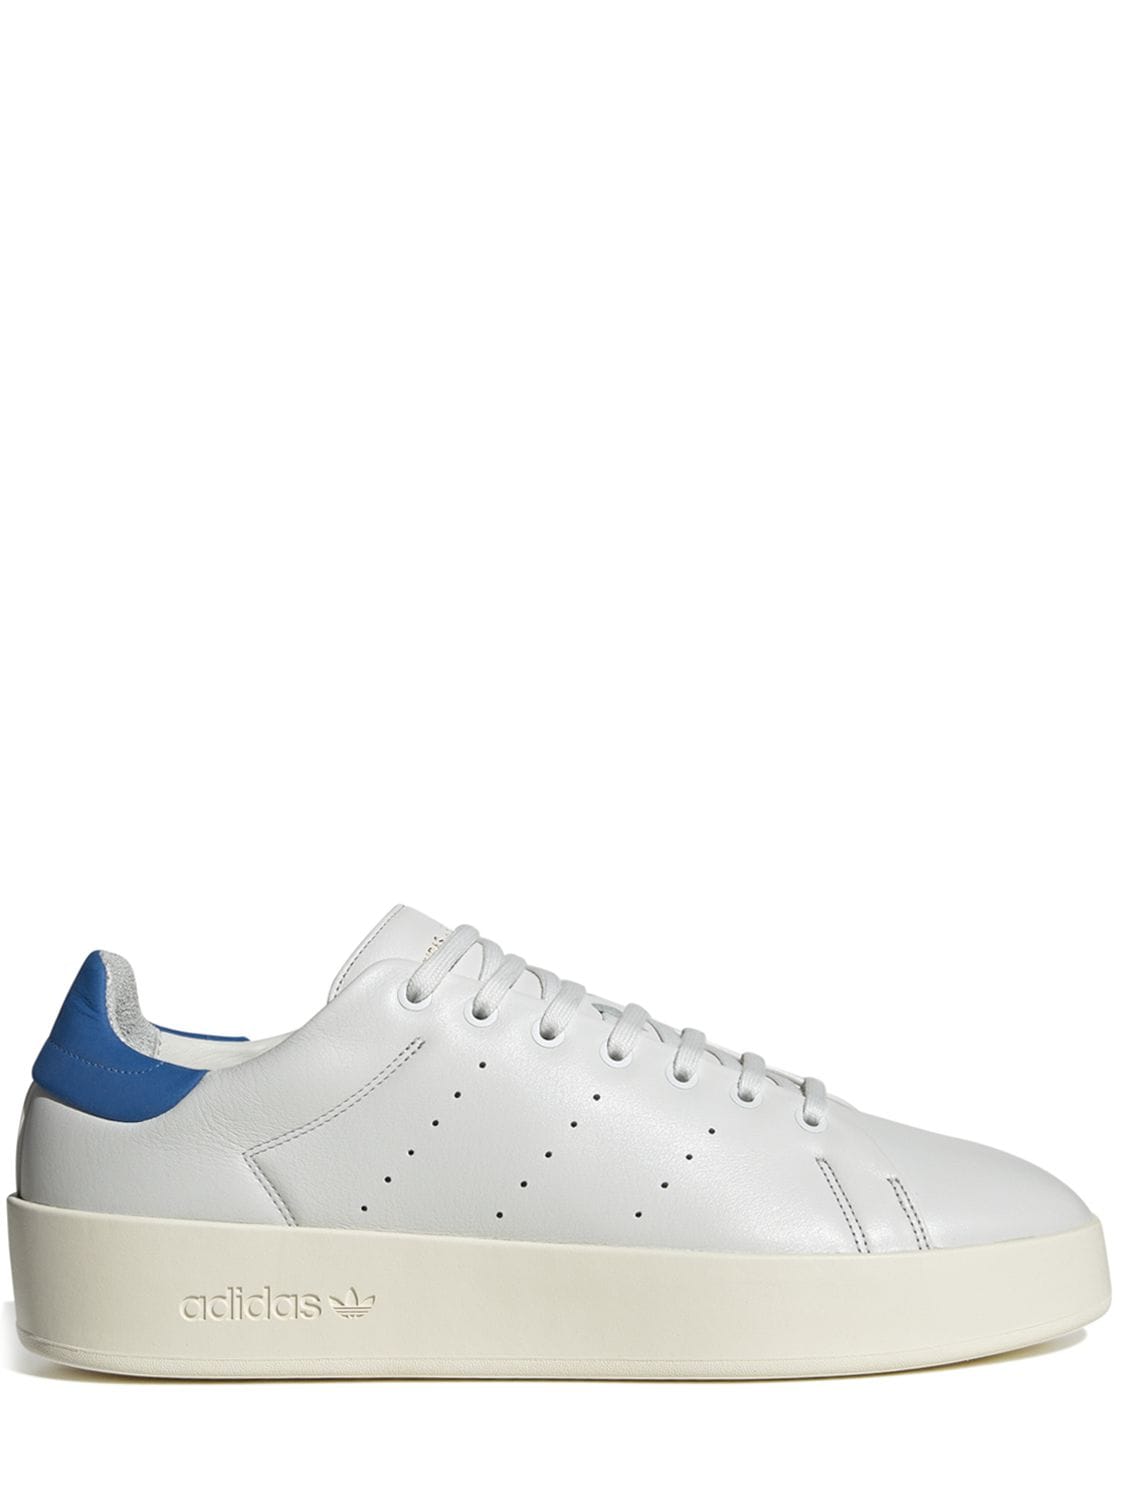 ADIDAS ORIGINALS RELASTED STAN SMITH SNEAKERS